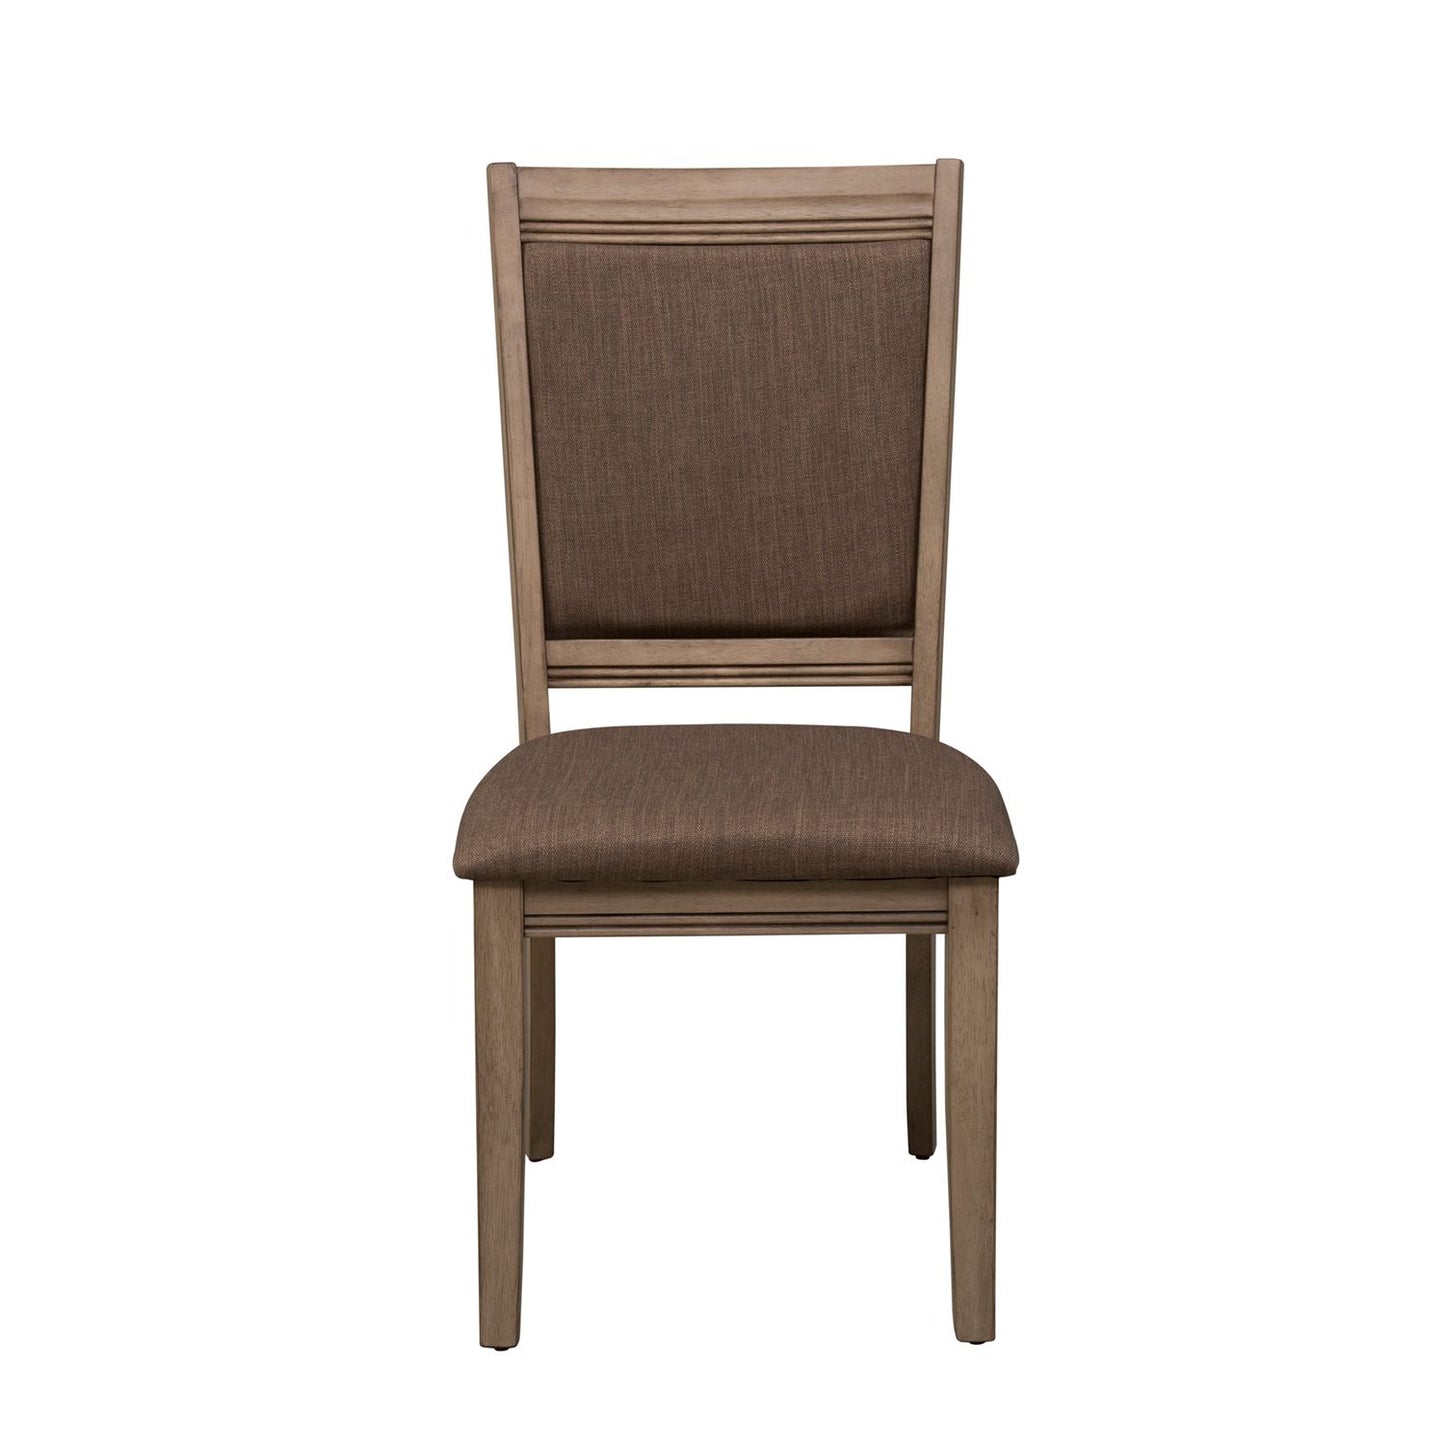 Sun Valley Upholstered Dining Chair Limited Availability